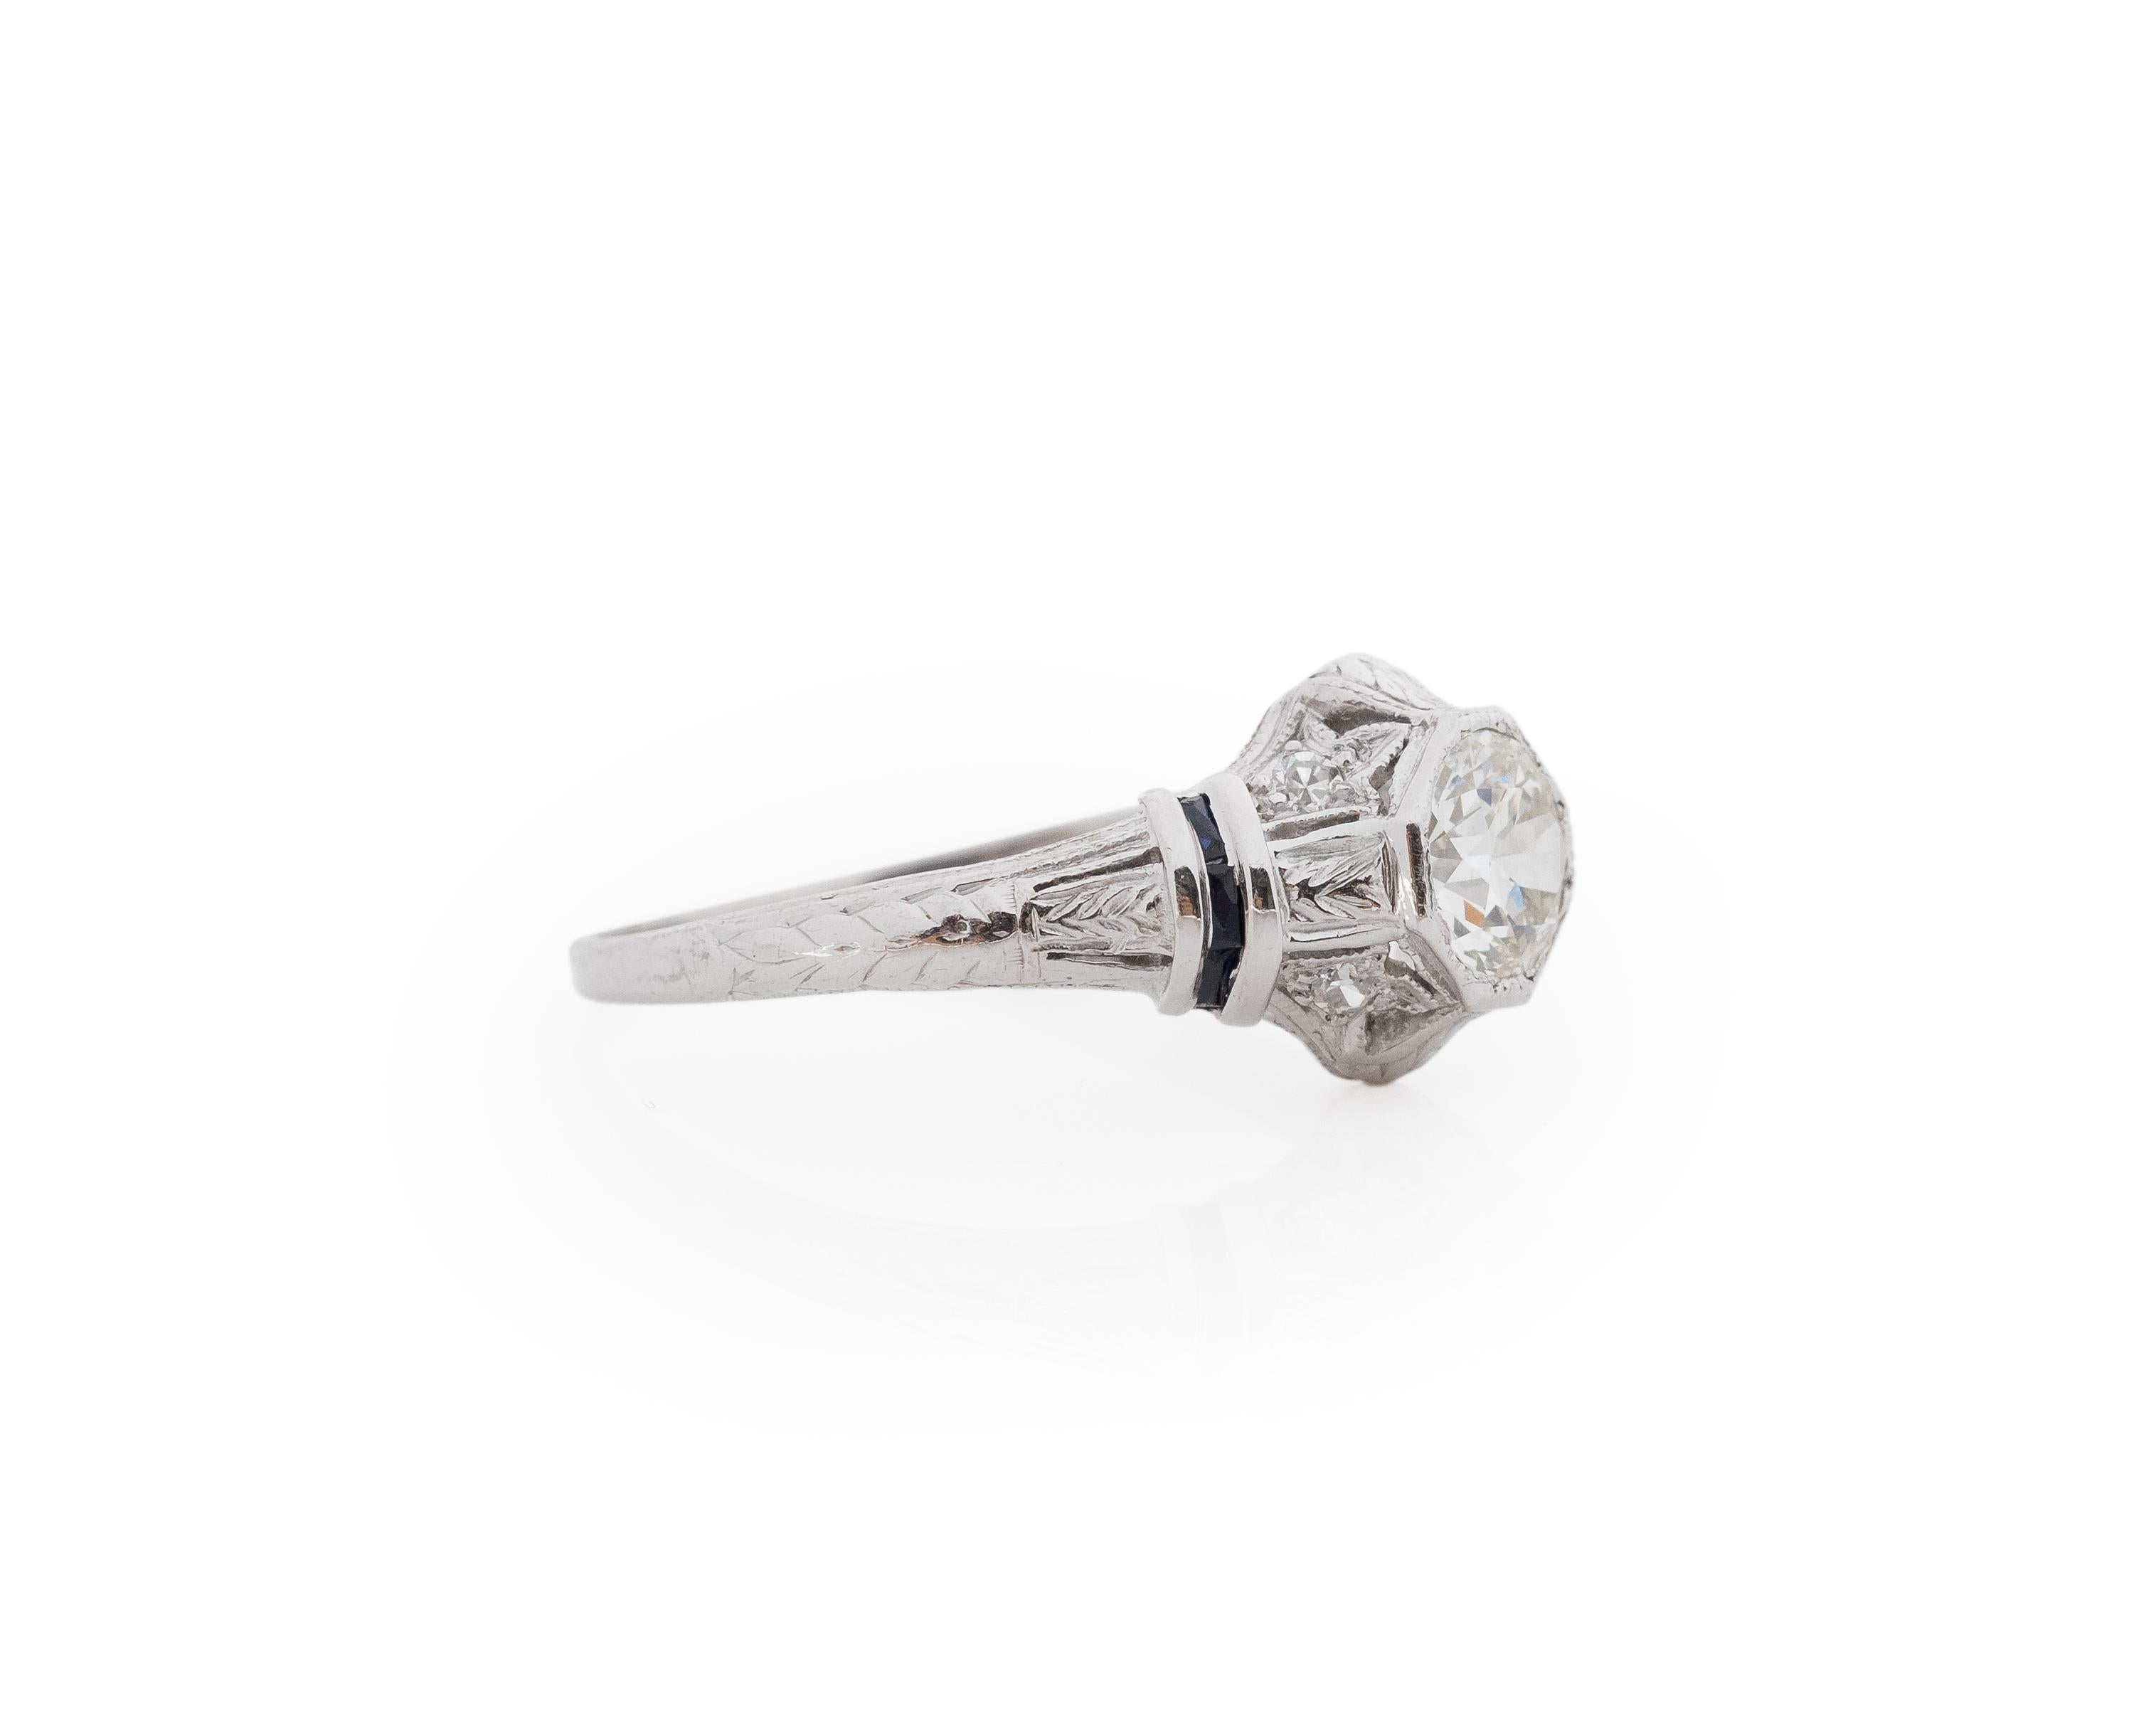 Year: 1940s

Item Details:
Ring Size: 7.75
Metal Type: Platinum [Hallmarked, and Tested]
Weight: 2.8. grams

Center Diamond Details:
Weight: .85ct total weight
Cut: Old European brilliant
Color: G
Clarity: VS
Type: Natural

Finger to Top of Stone